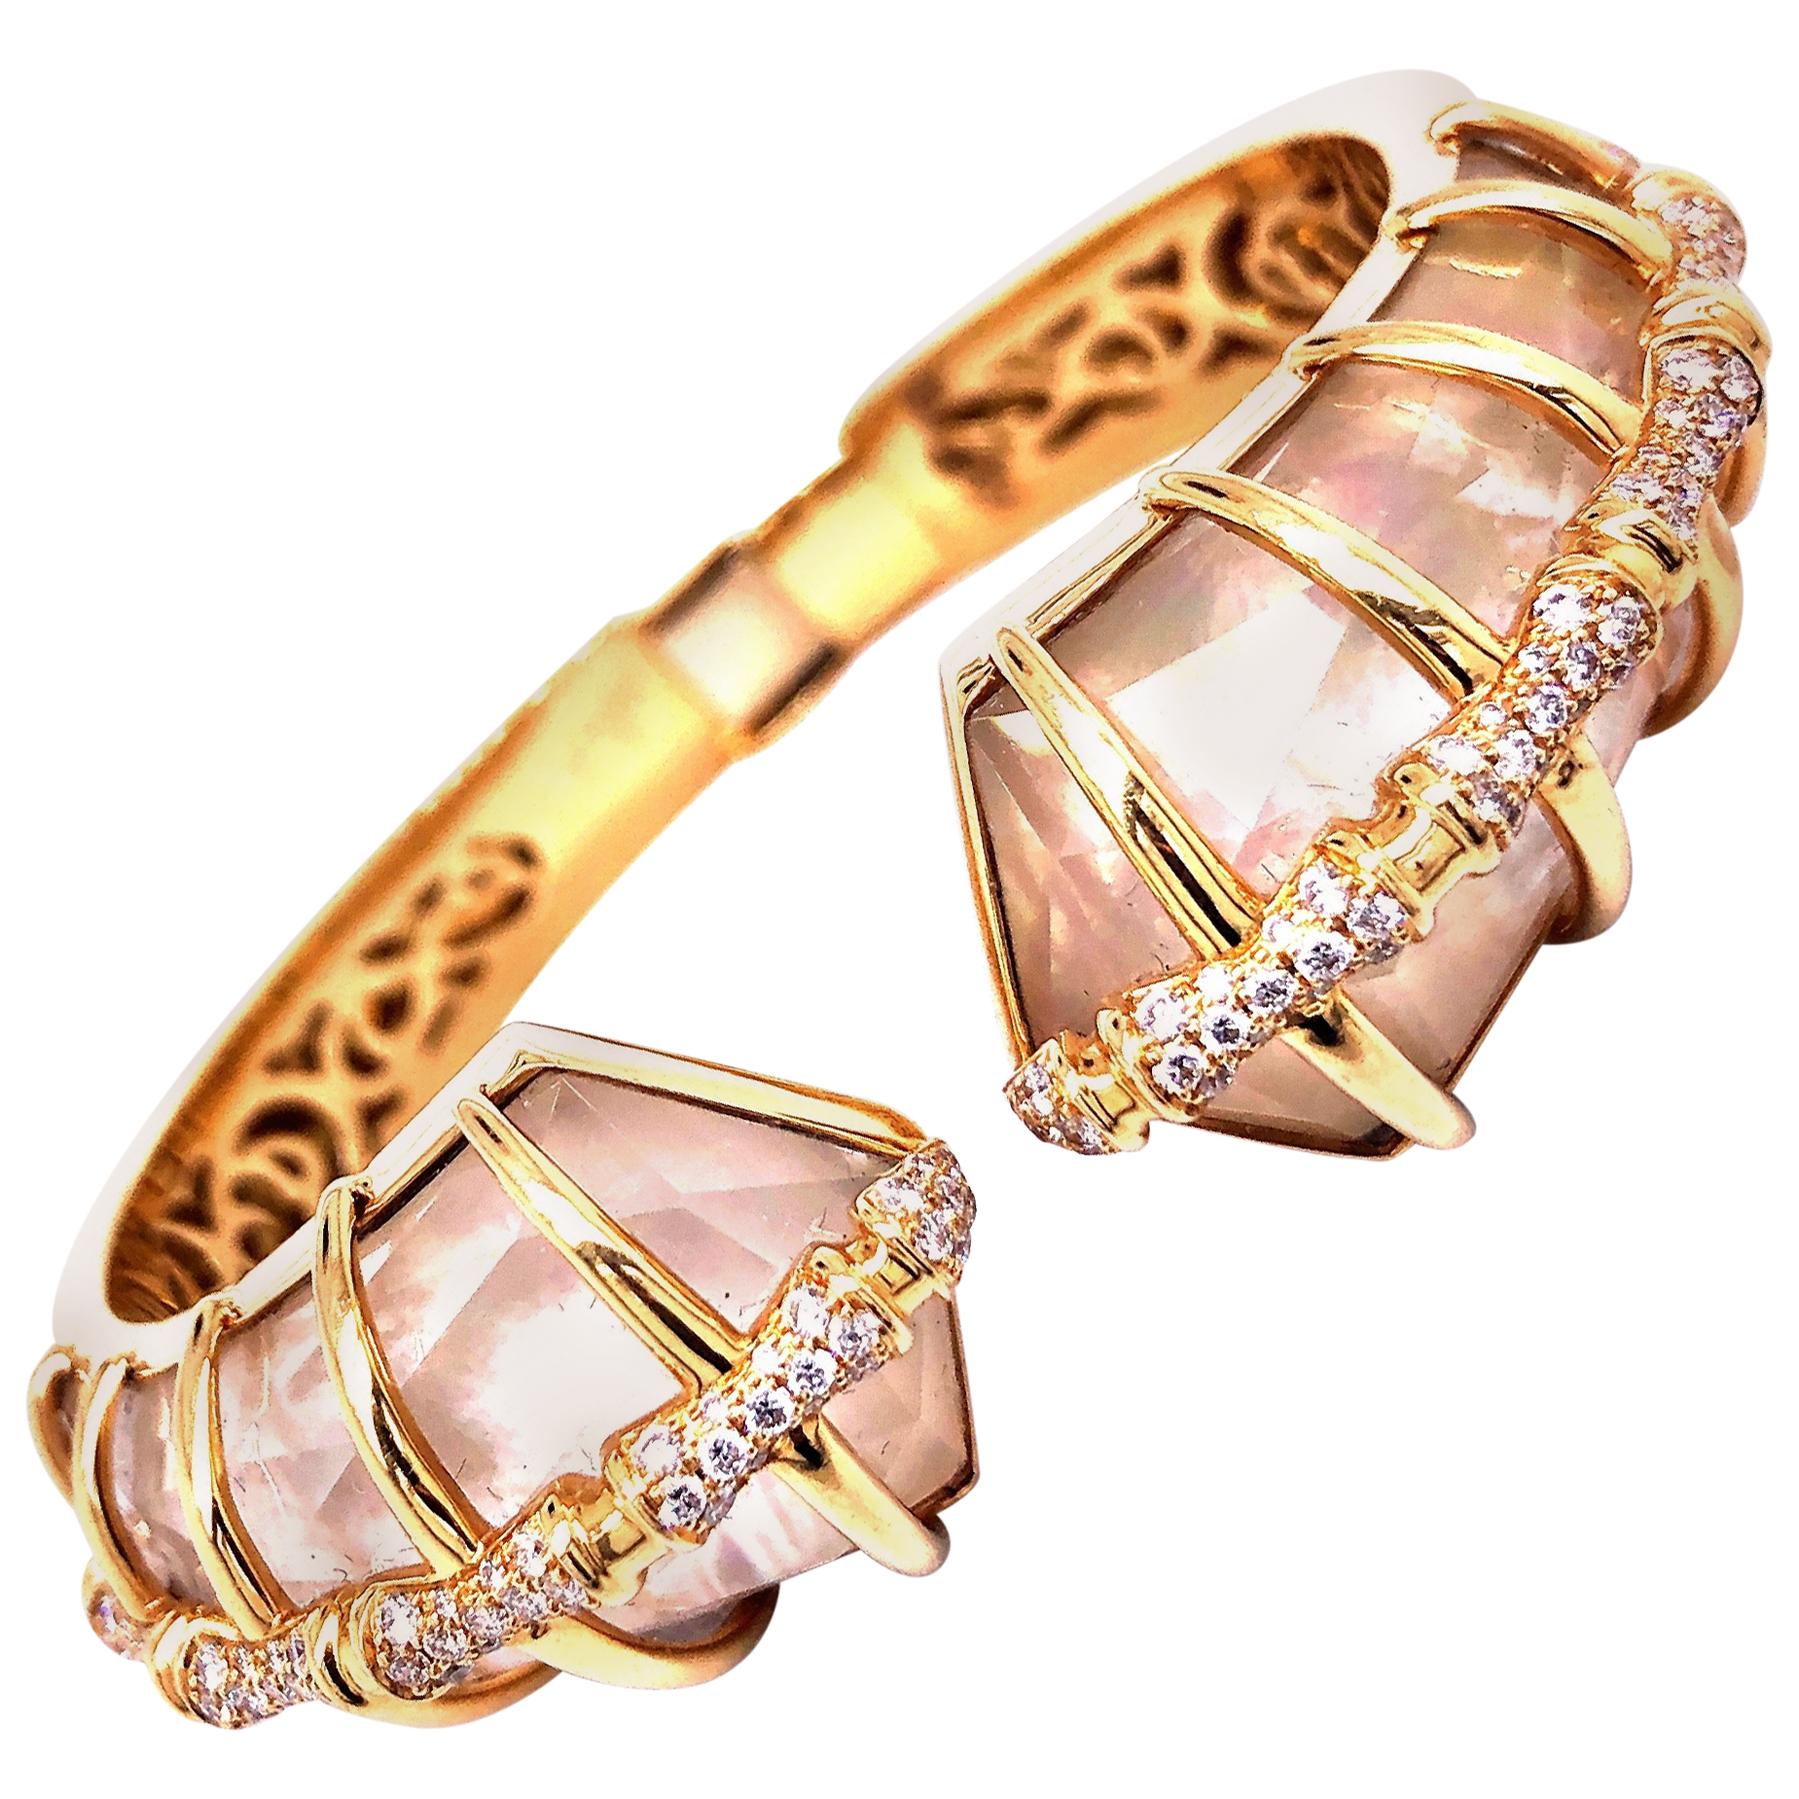 Stephen Webster Mother of Pearl Bracelet with Diamonds